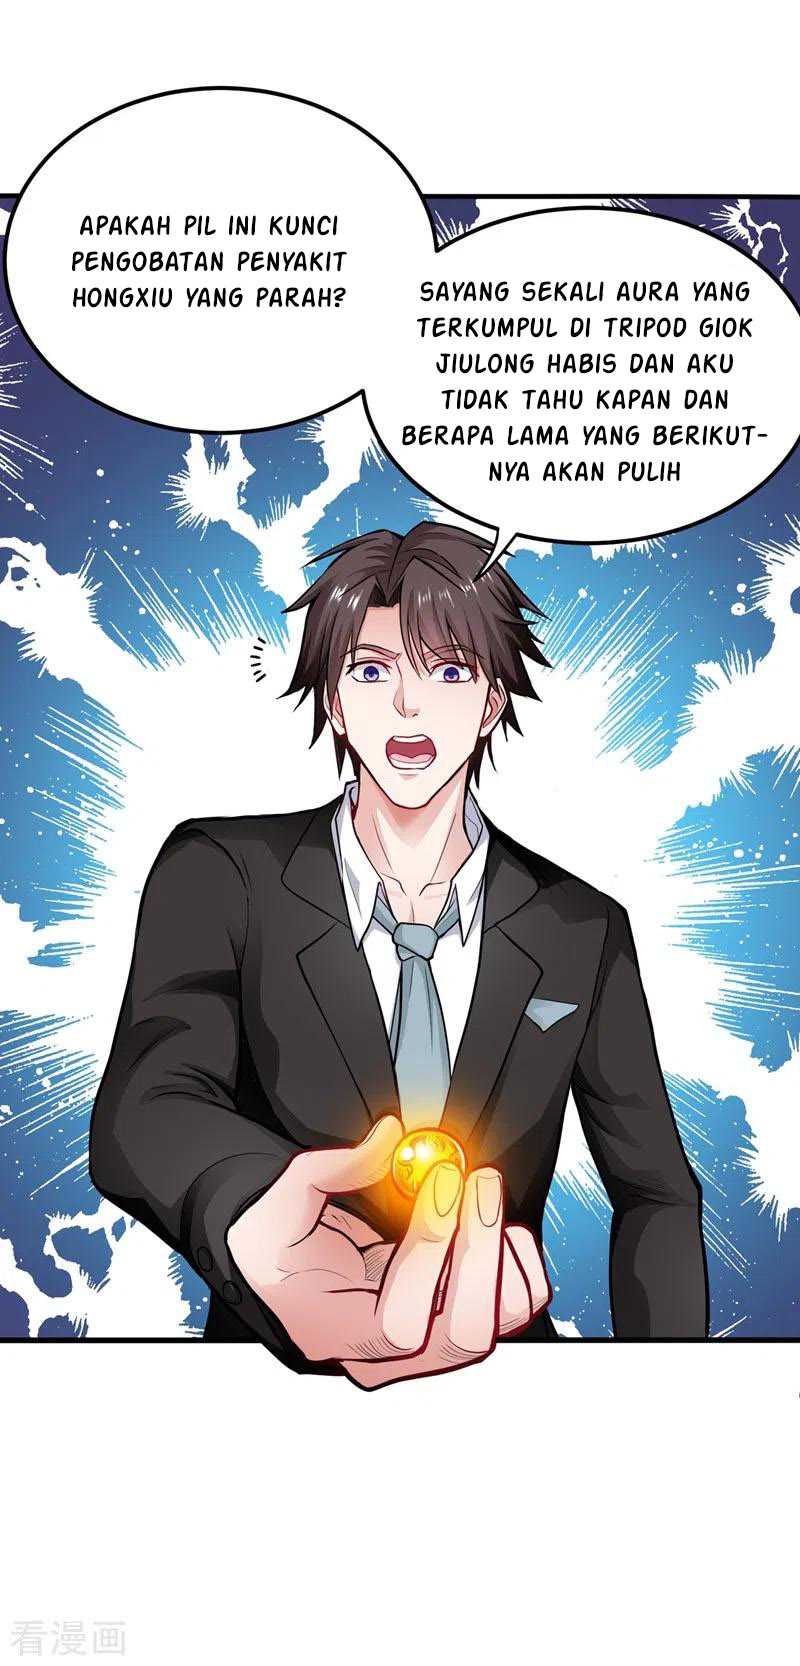 Strongest Divine Doctor Mixed City Chapter 134